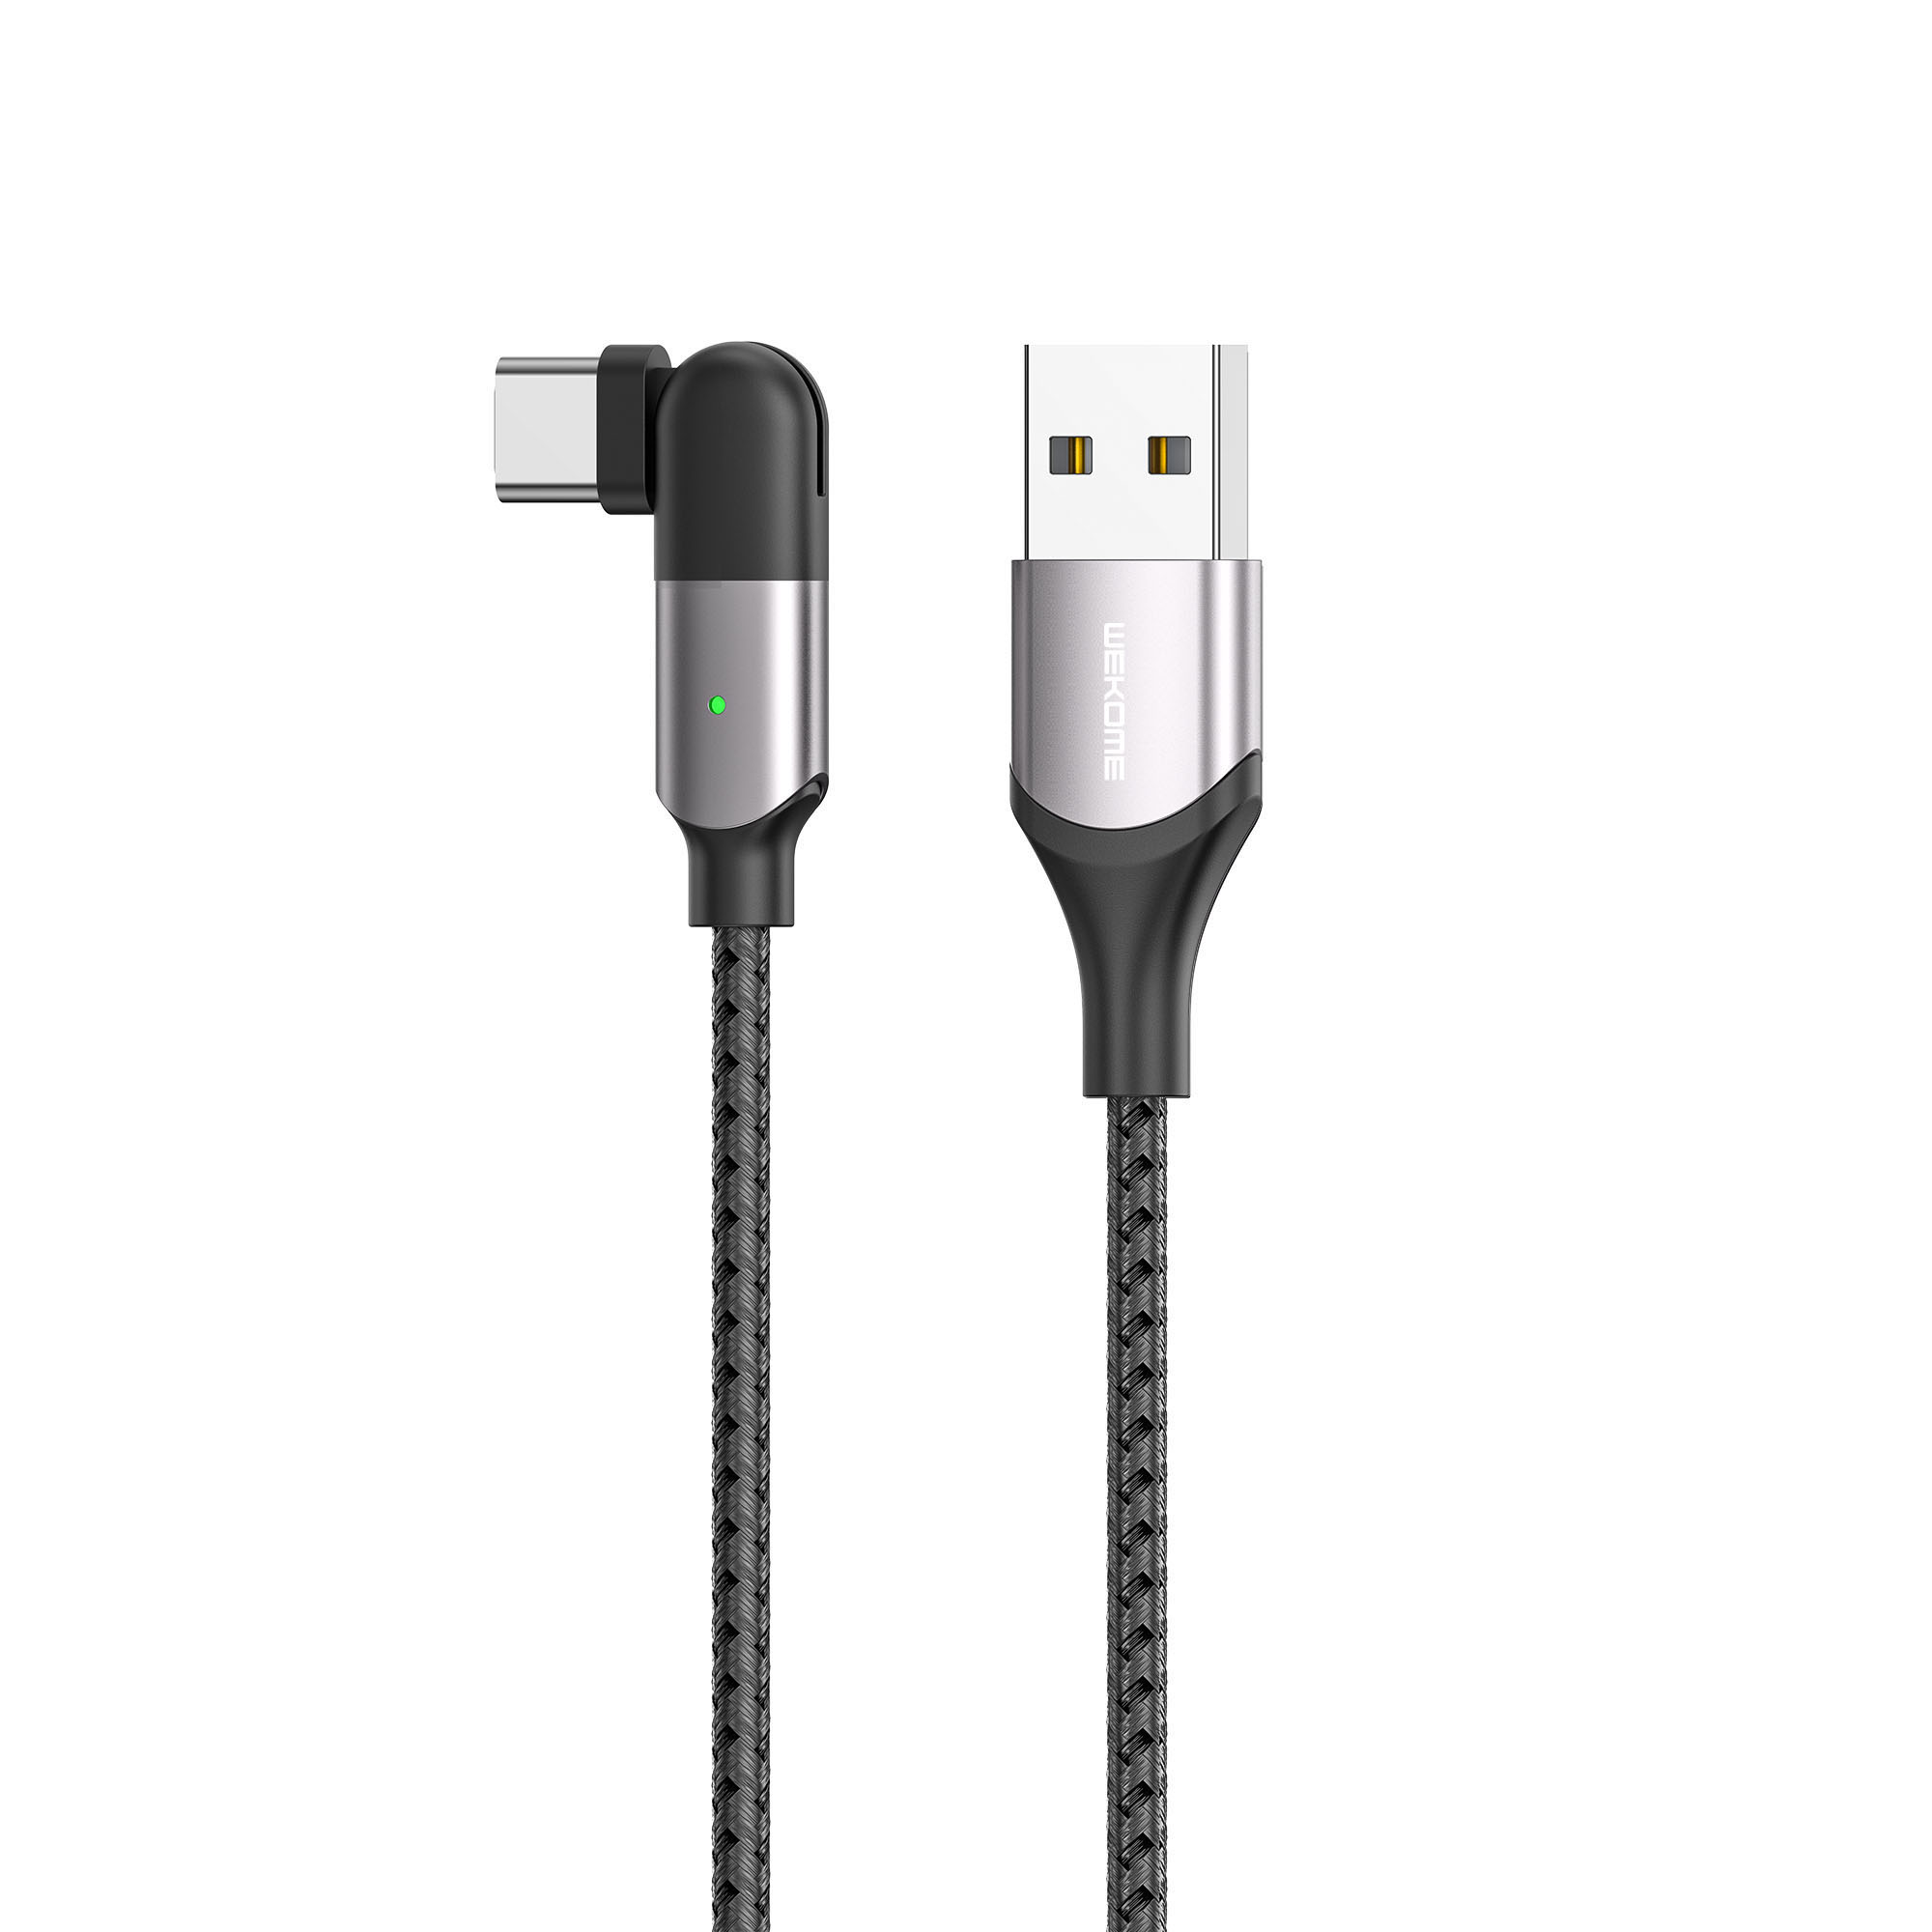 180° Rotation Fabric Charging Cable For Gaming